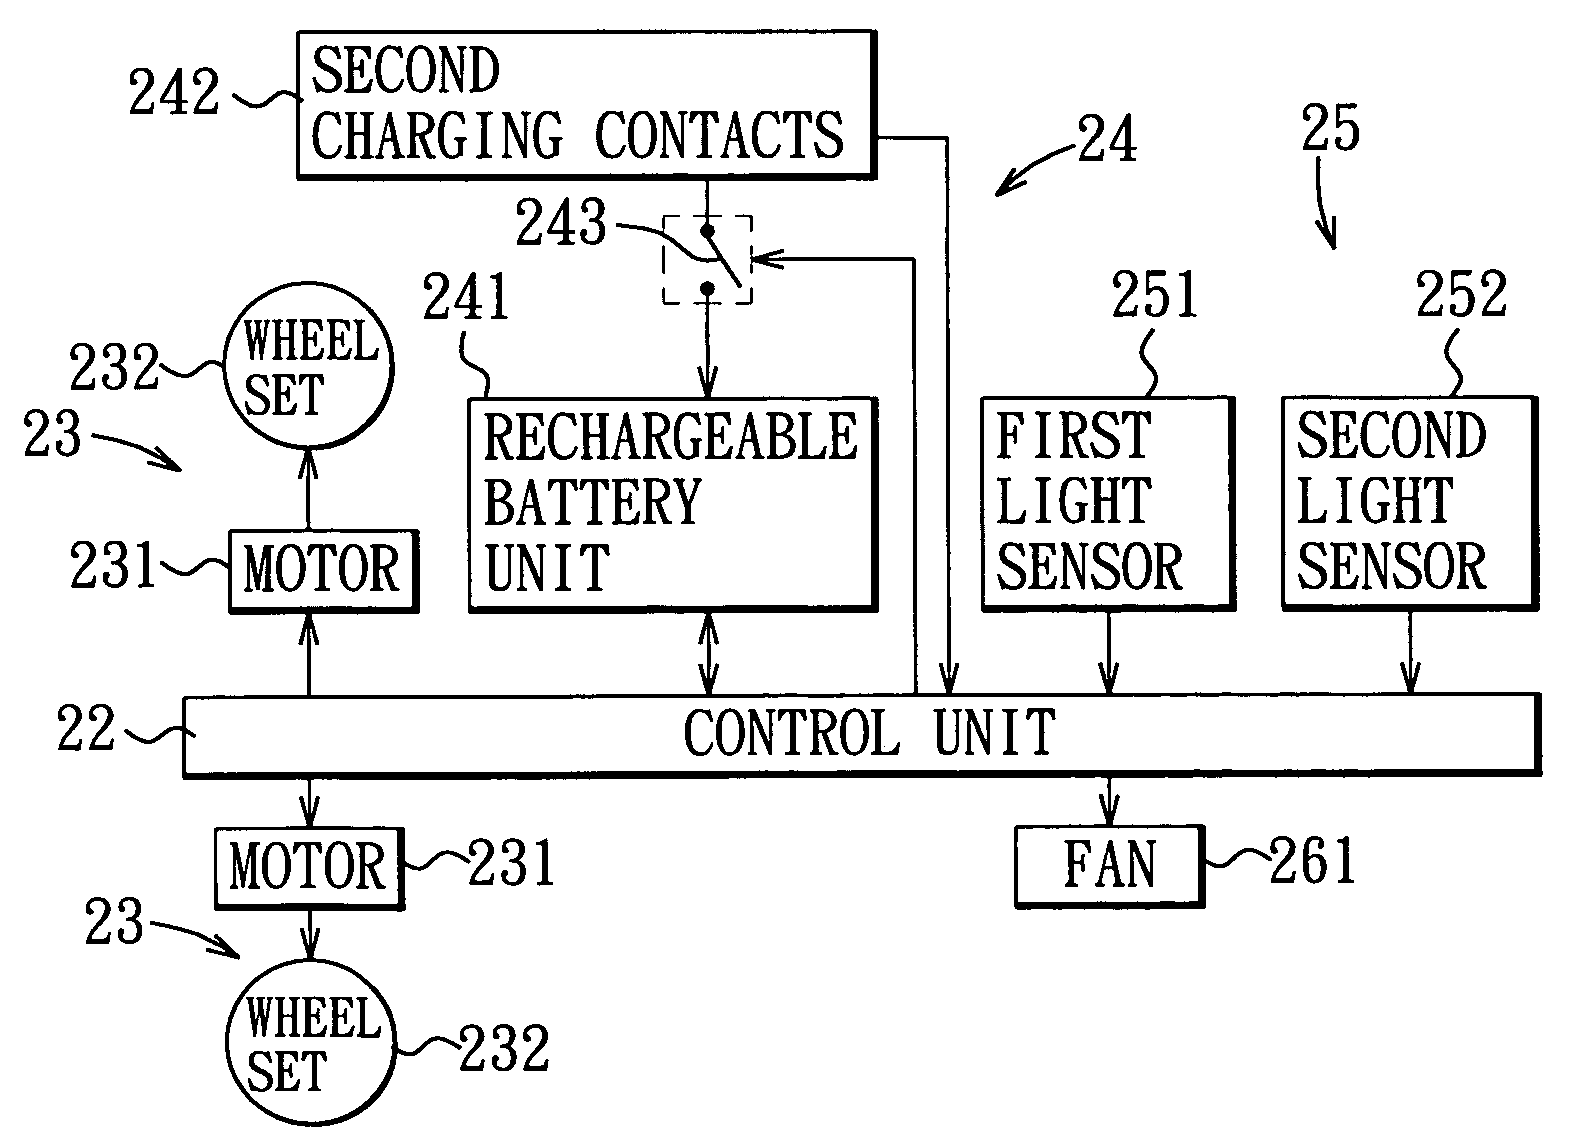 Mobile robotic system and battery charging method therefor